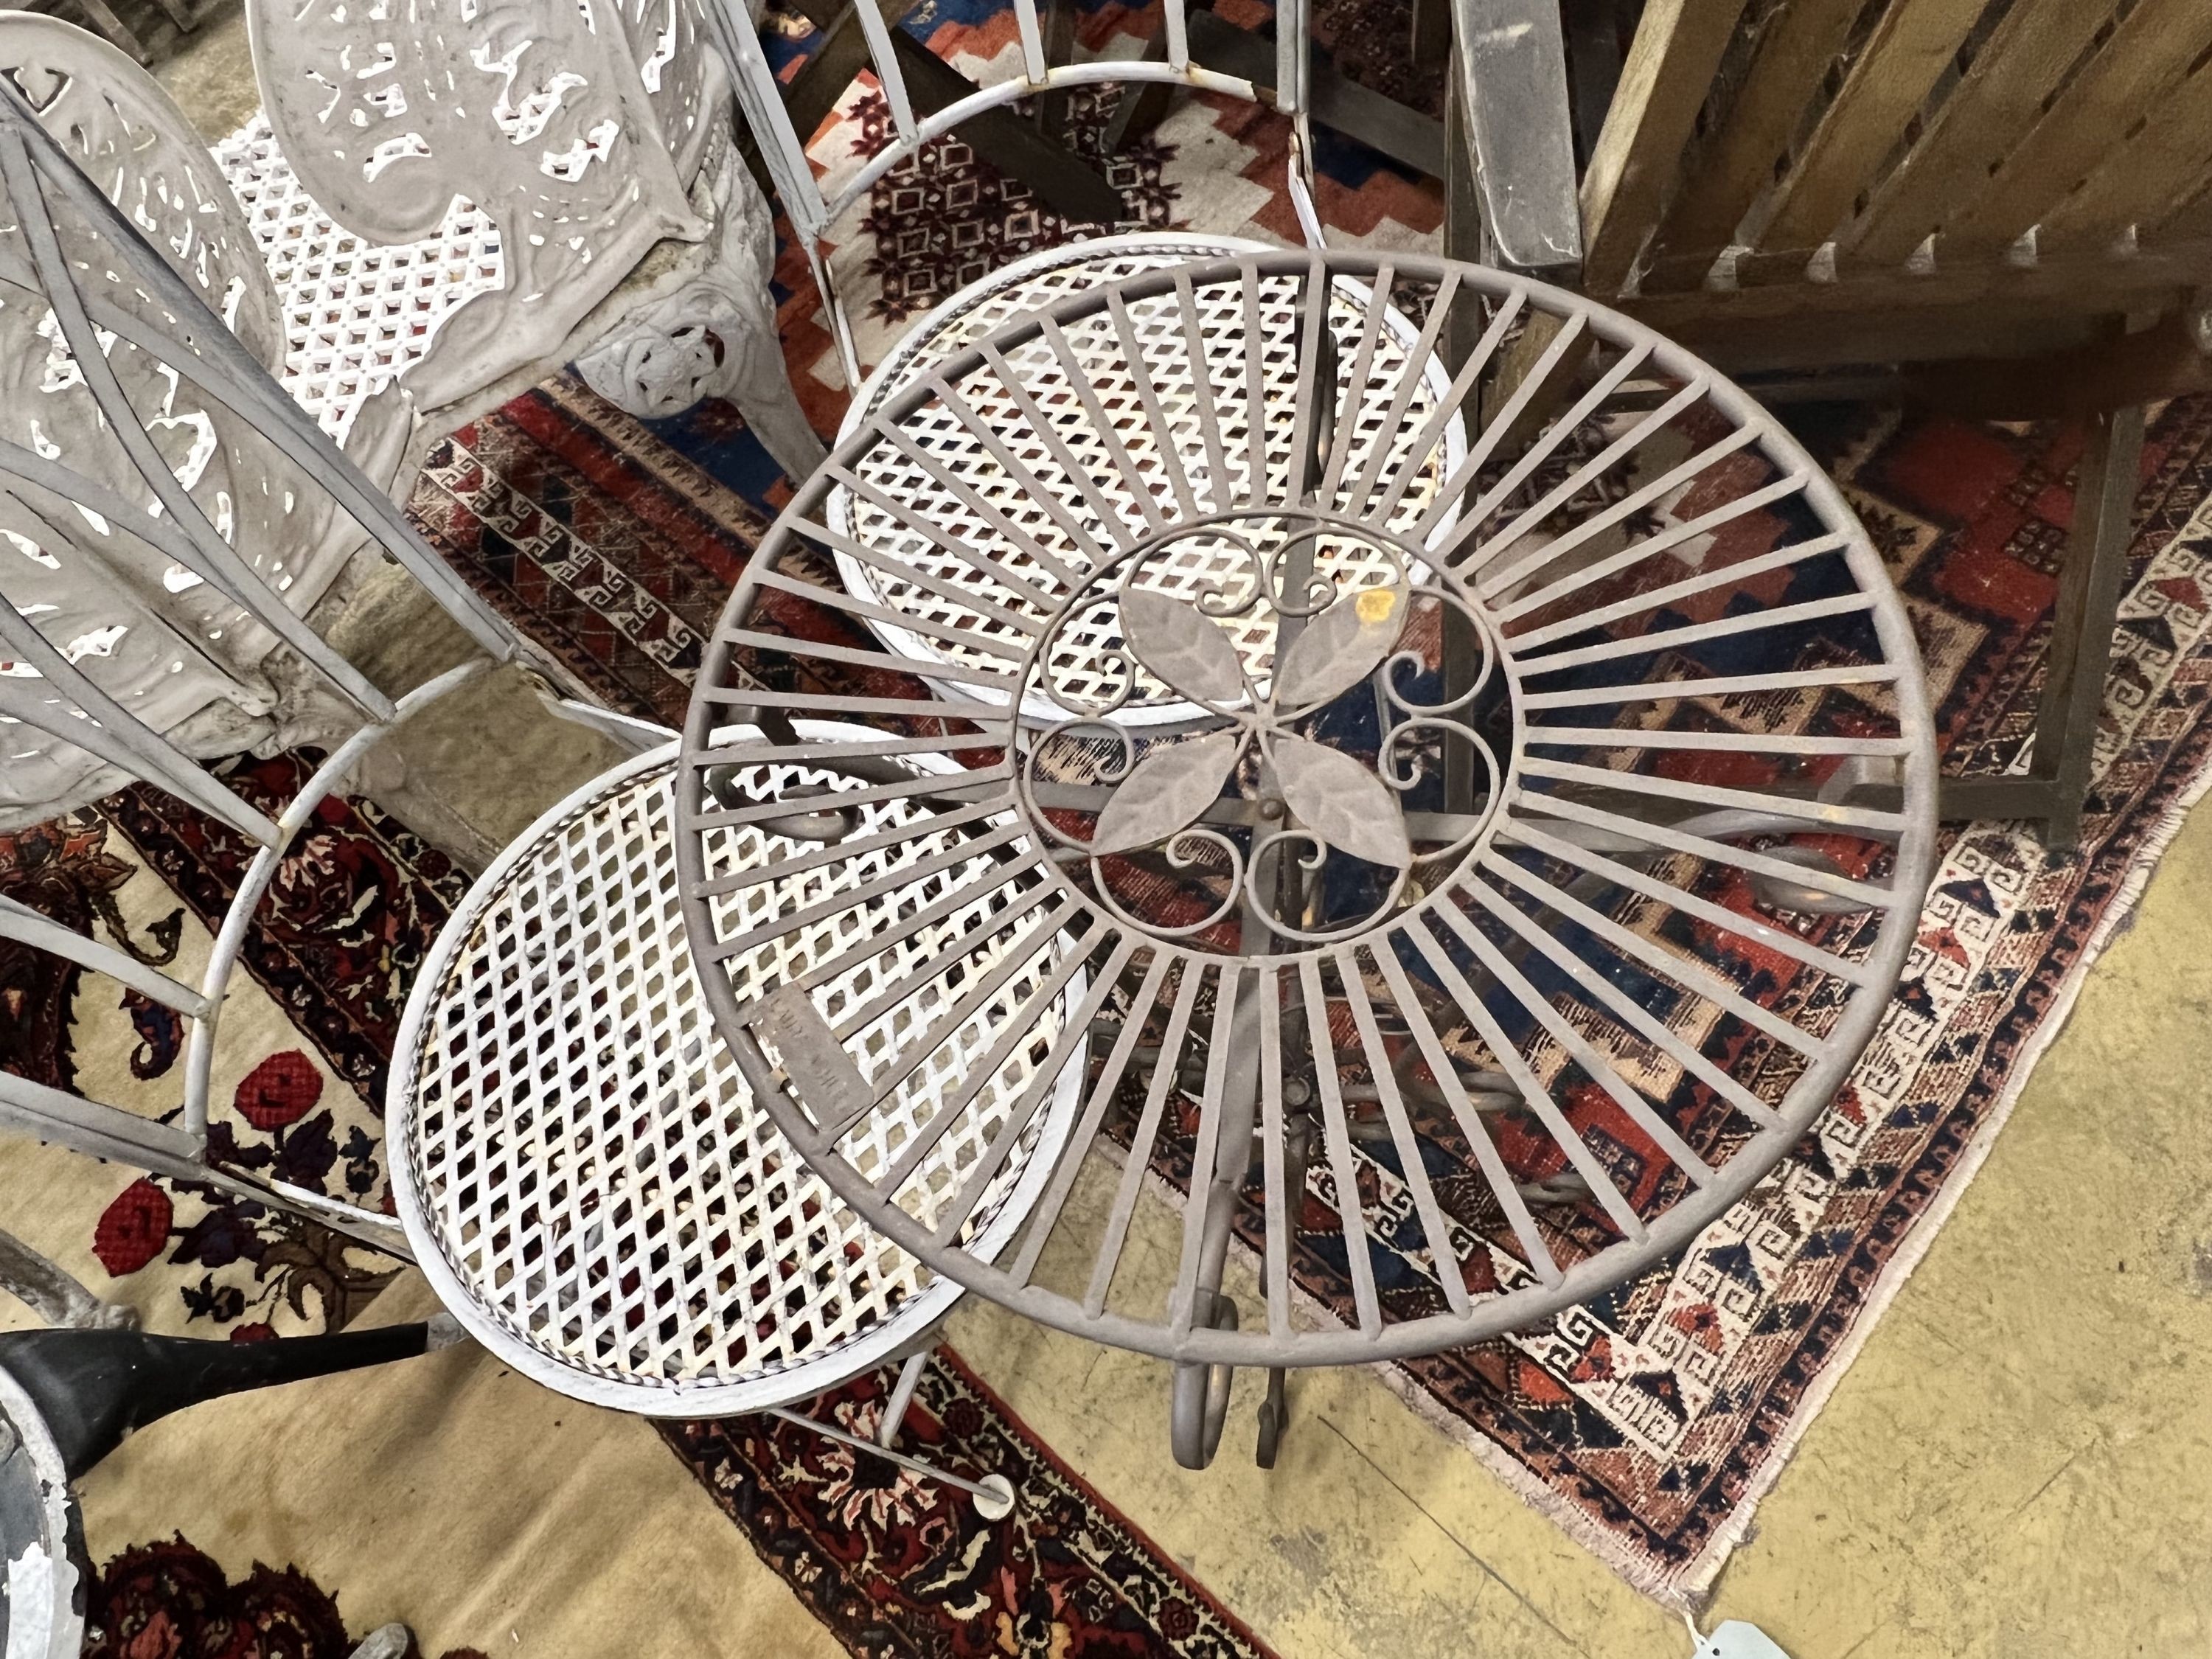 A Laura Ashley circular metal garden table, diameter 43cm, together with two folding garden chairs